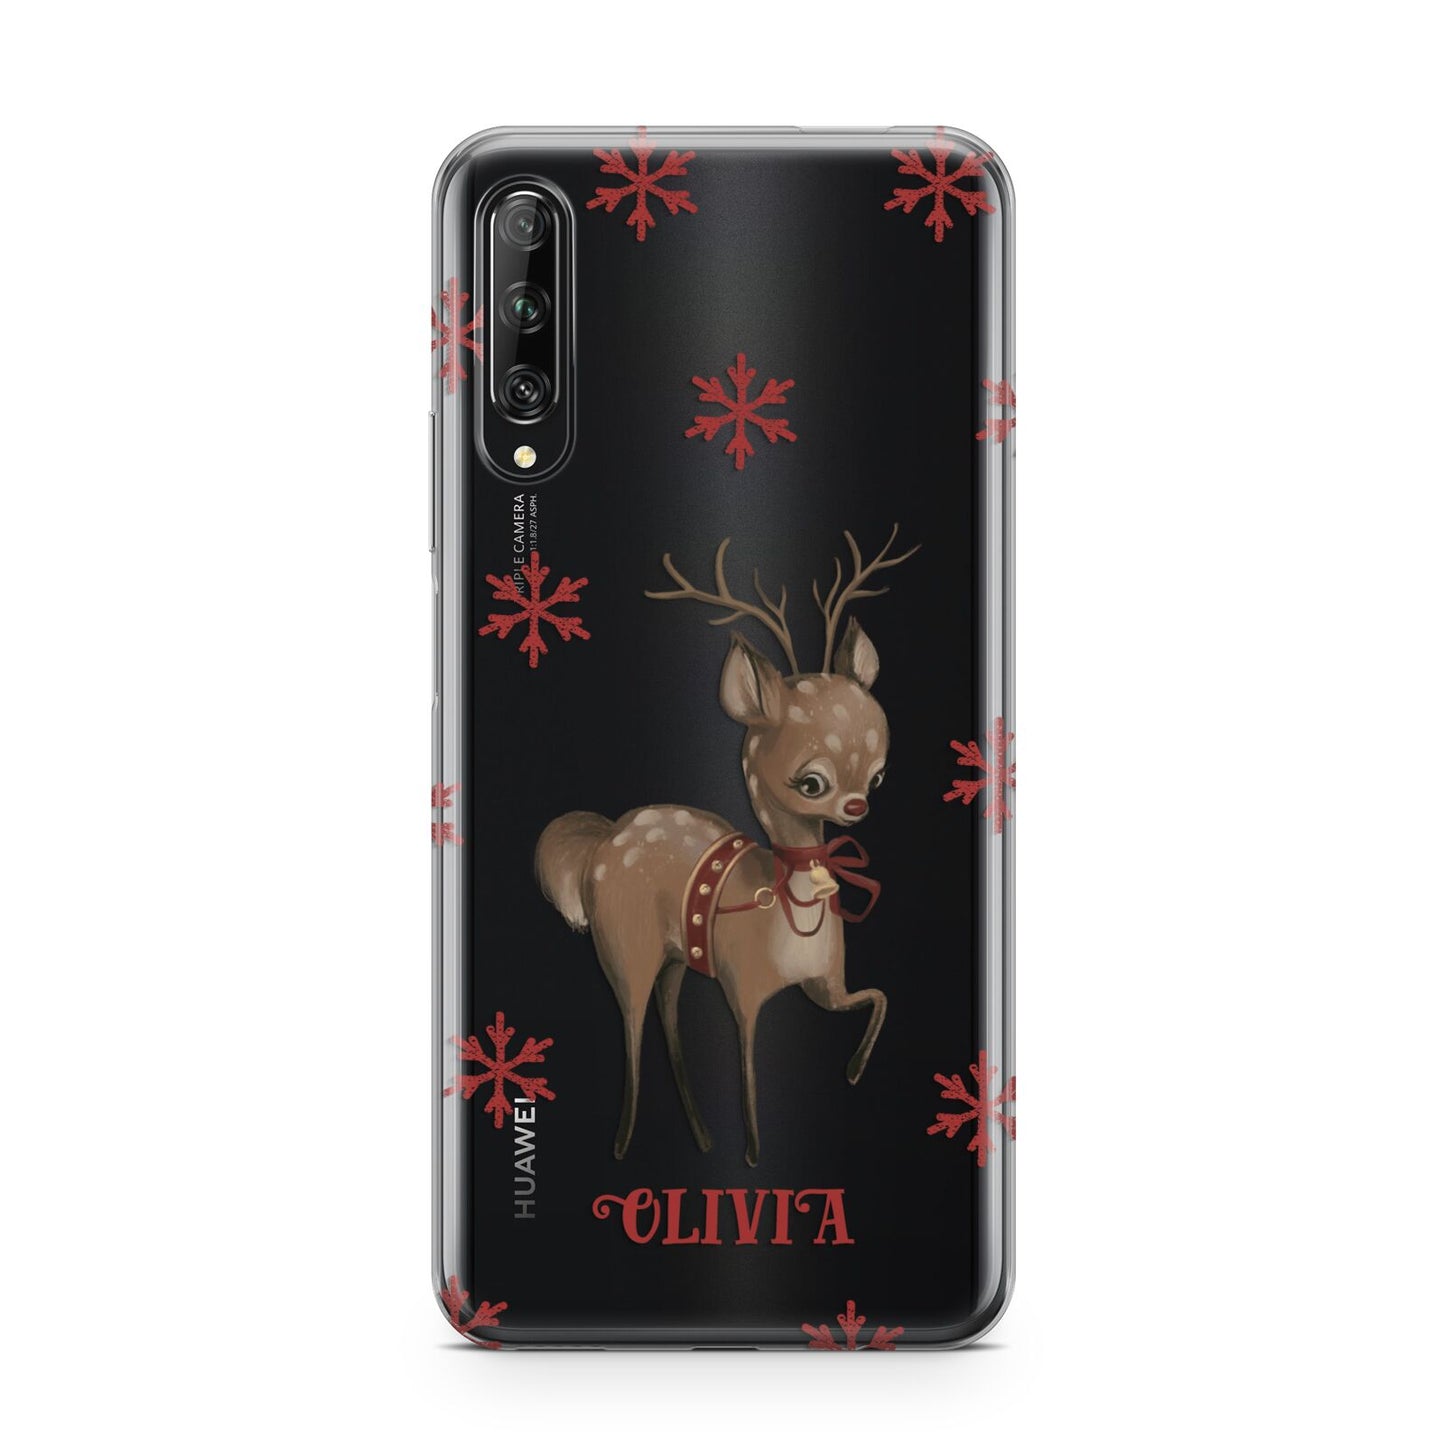 Rudolph Delivery Huawei P Smart Pro 2019